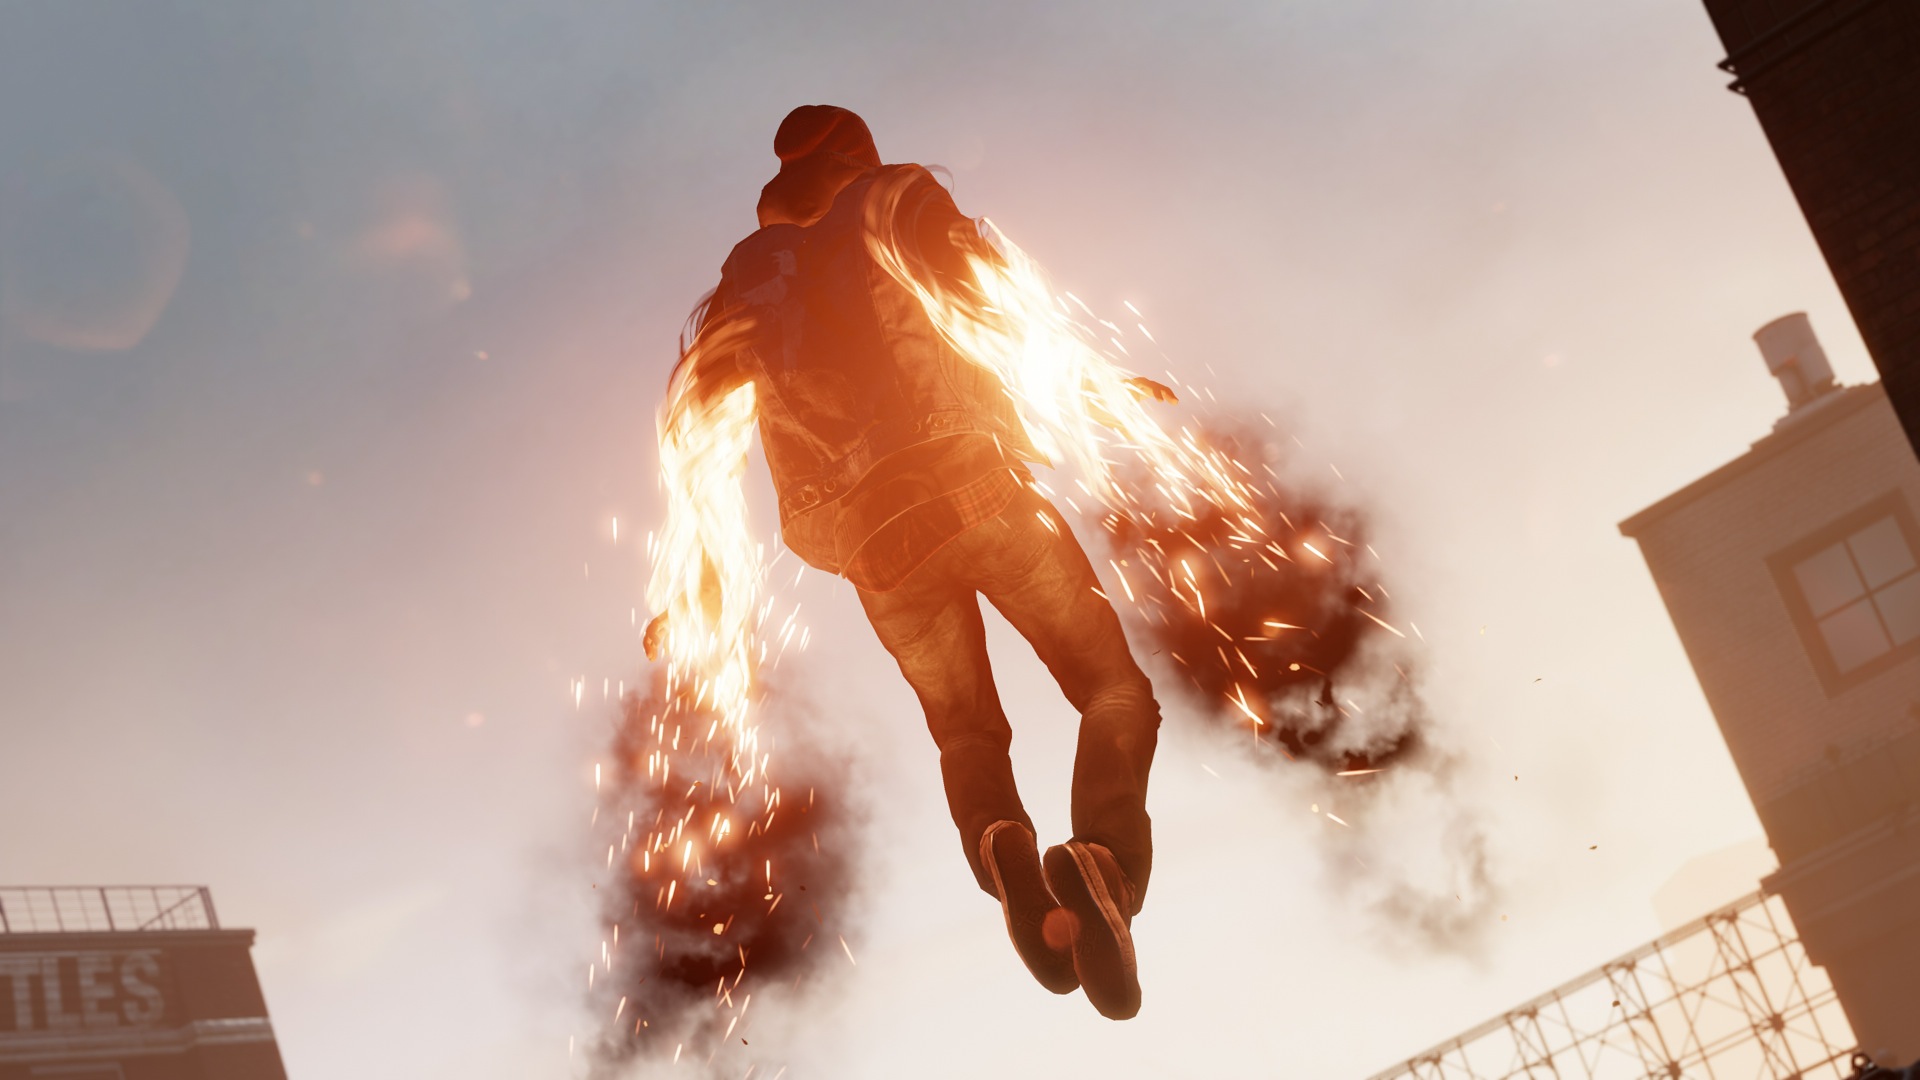 Infamous second steam фото 32